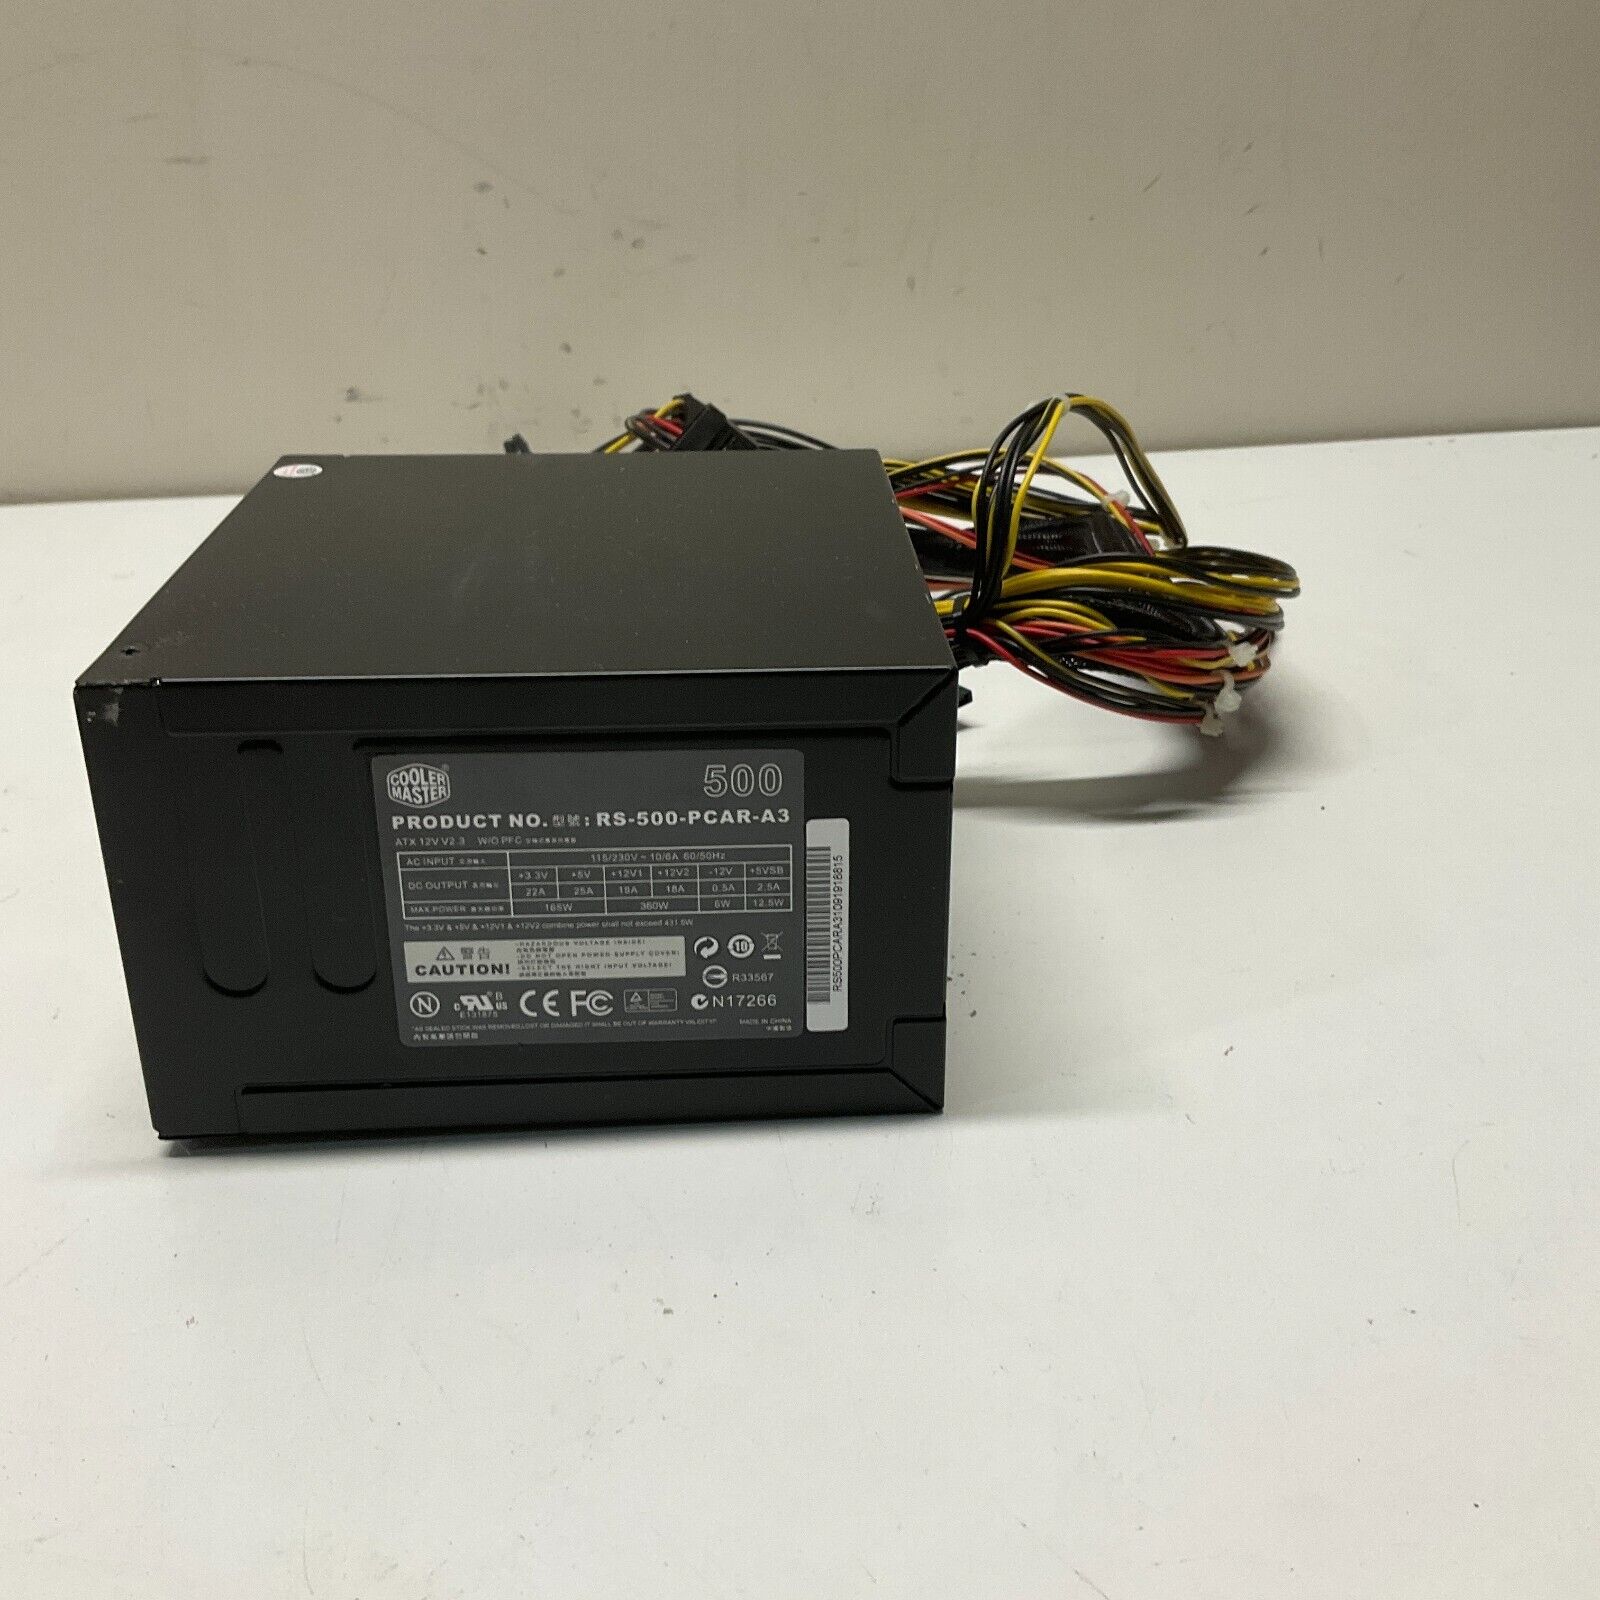 Cooler Master Model RS-500-PCAR-A3 500W Power Supply Tested